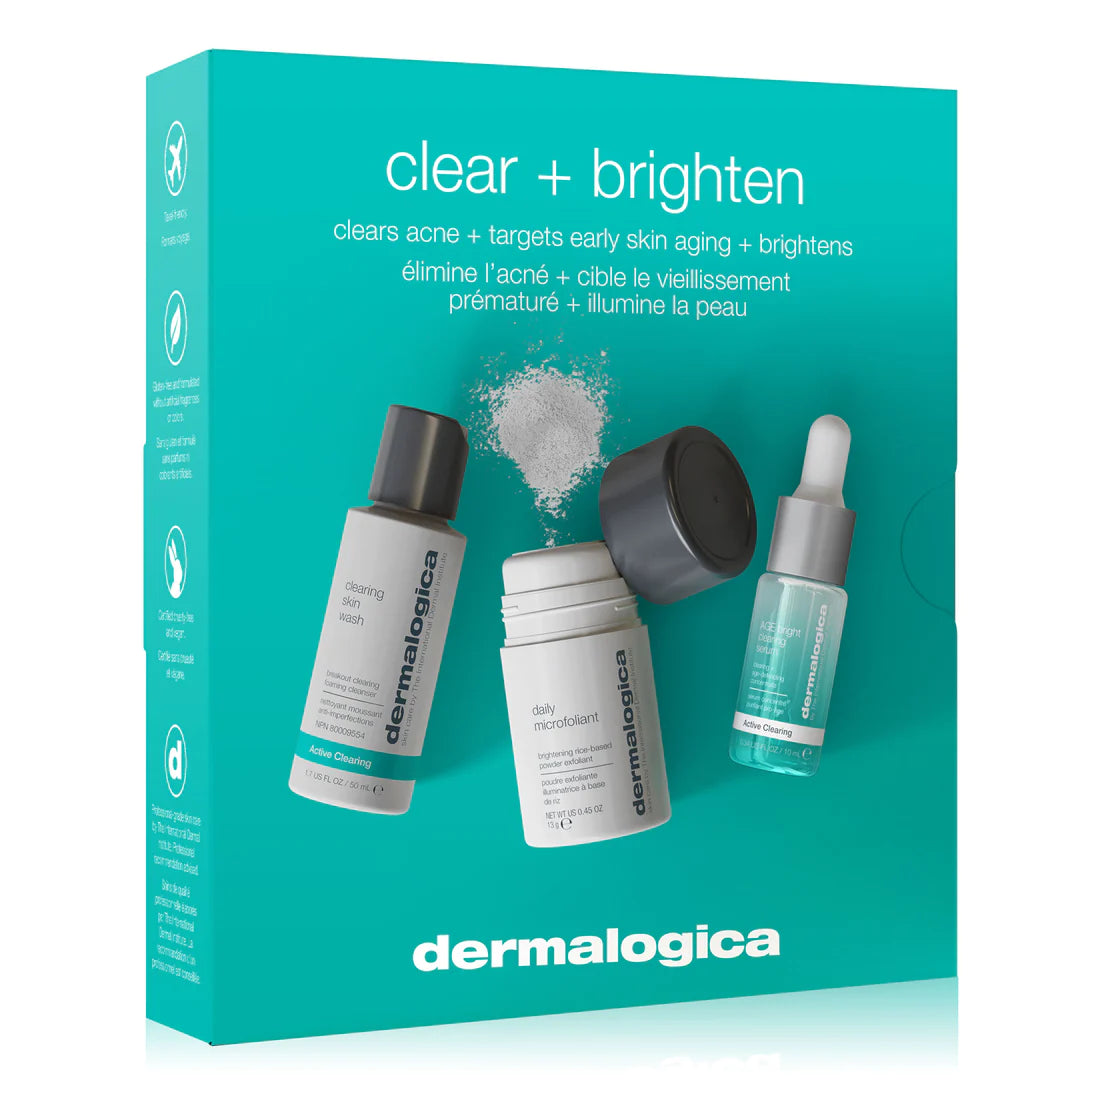 clear and brighten kit